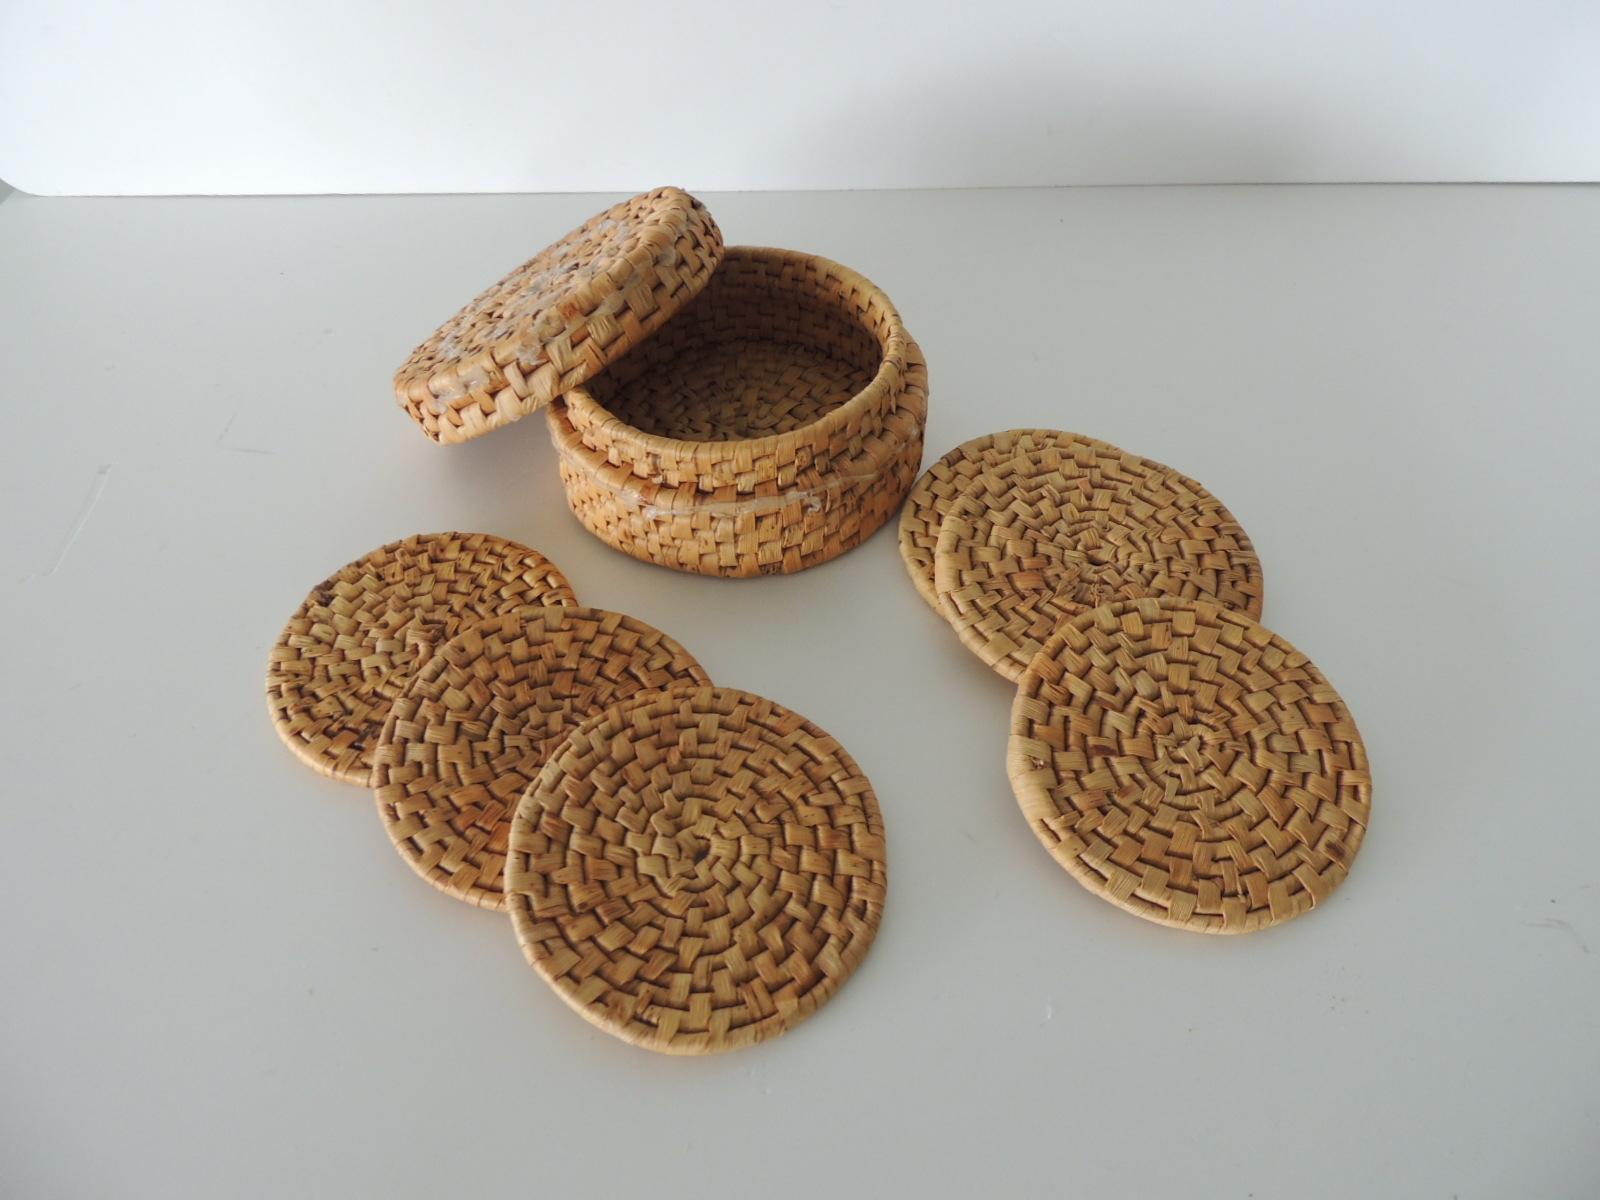 Round set of (6) seagrass woven coasters
with woven dispenser.
Size: 4